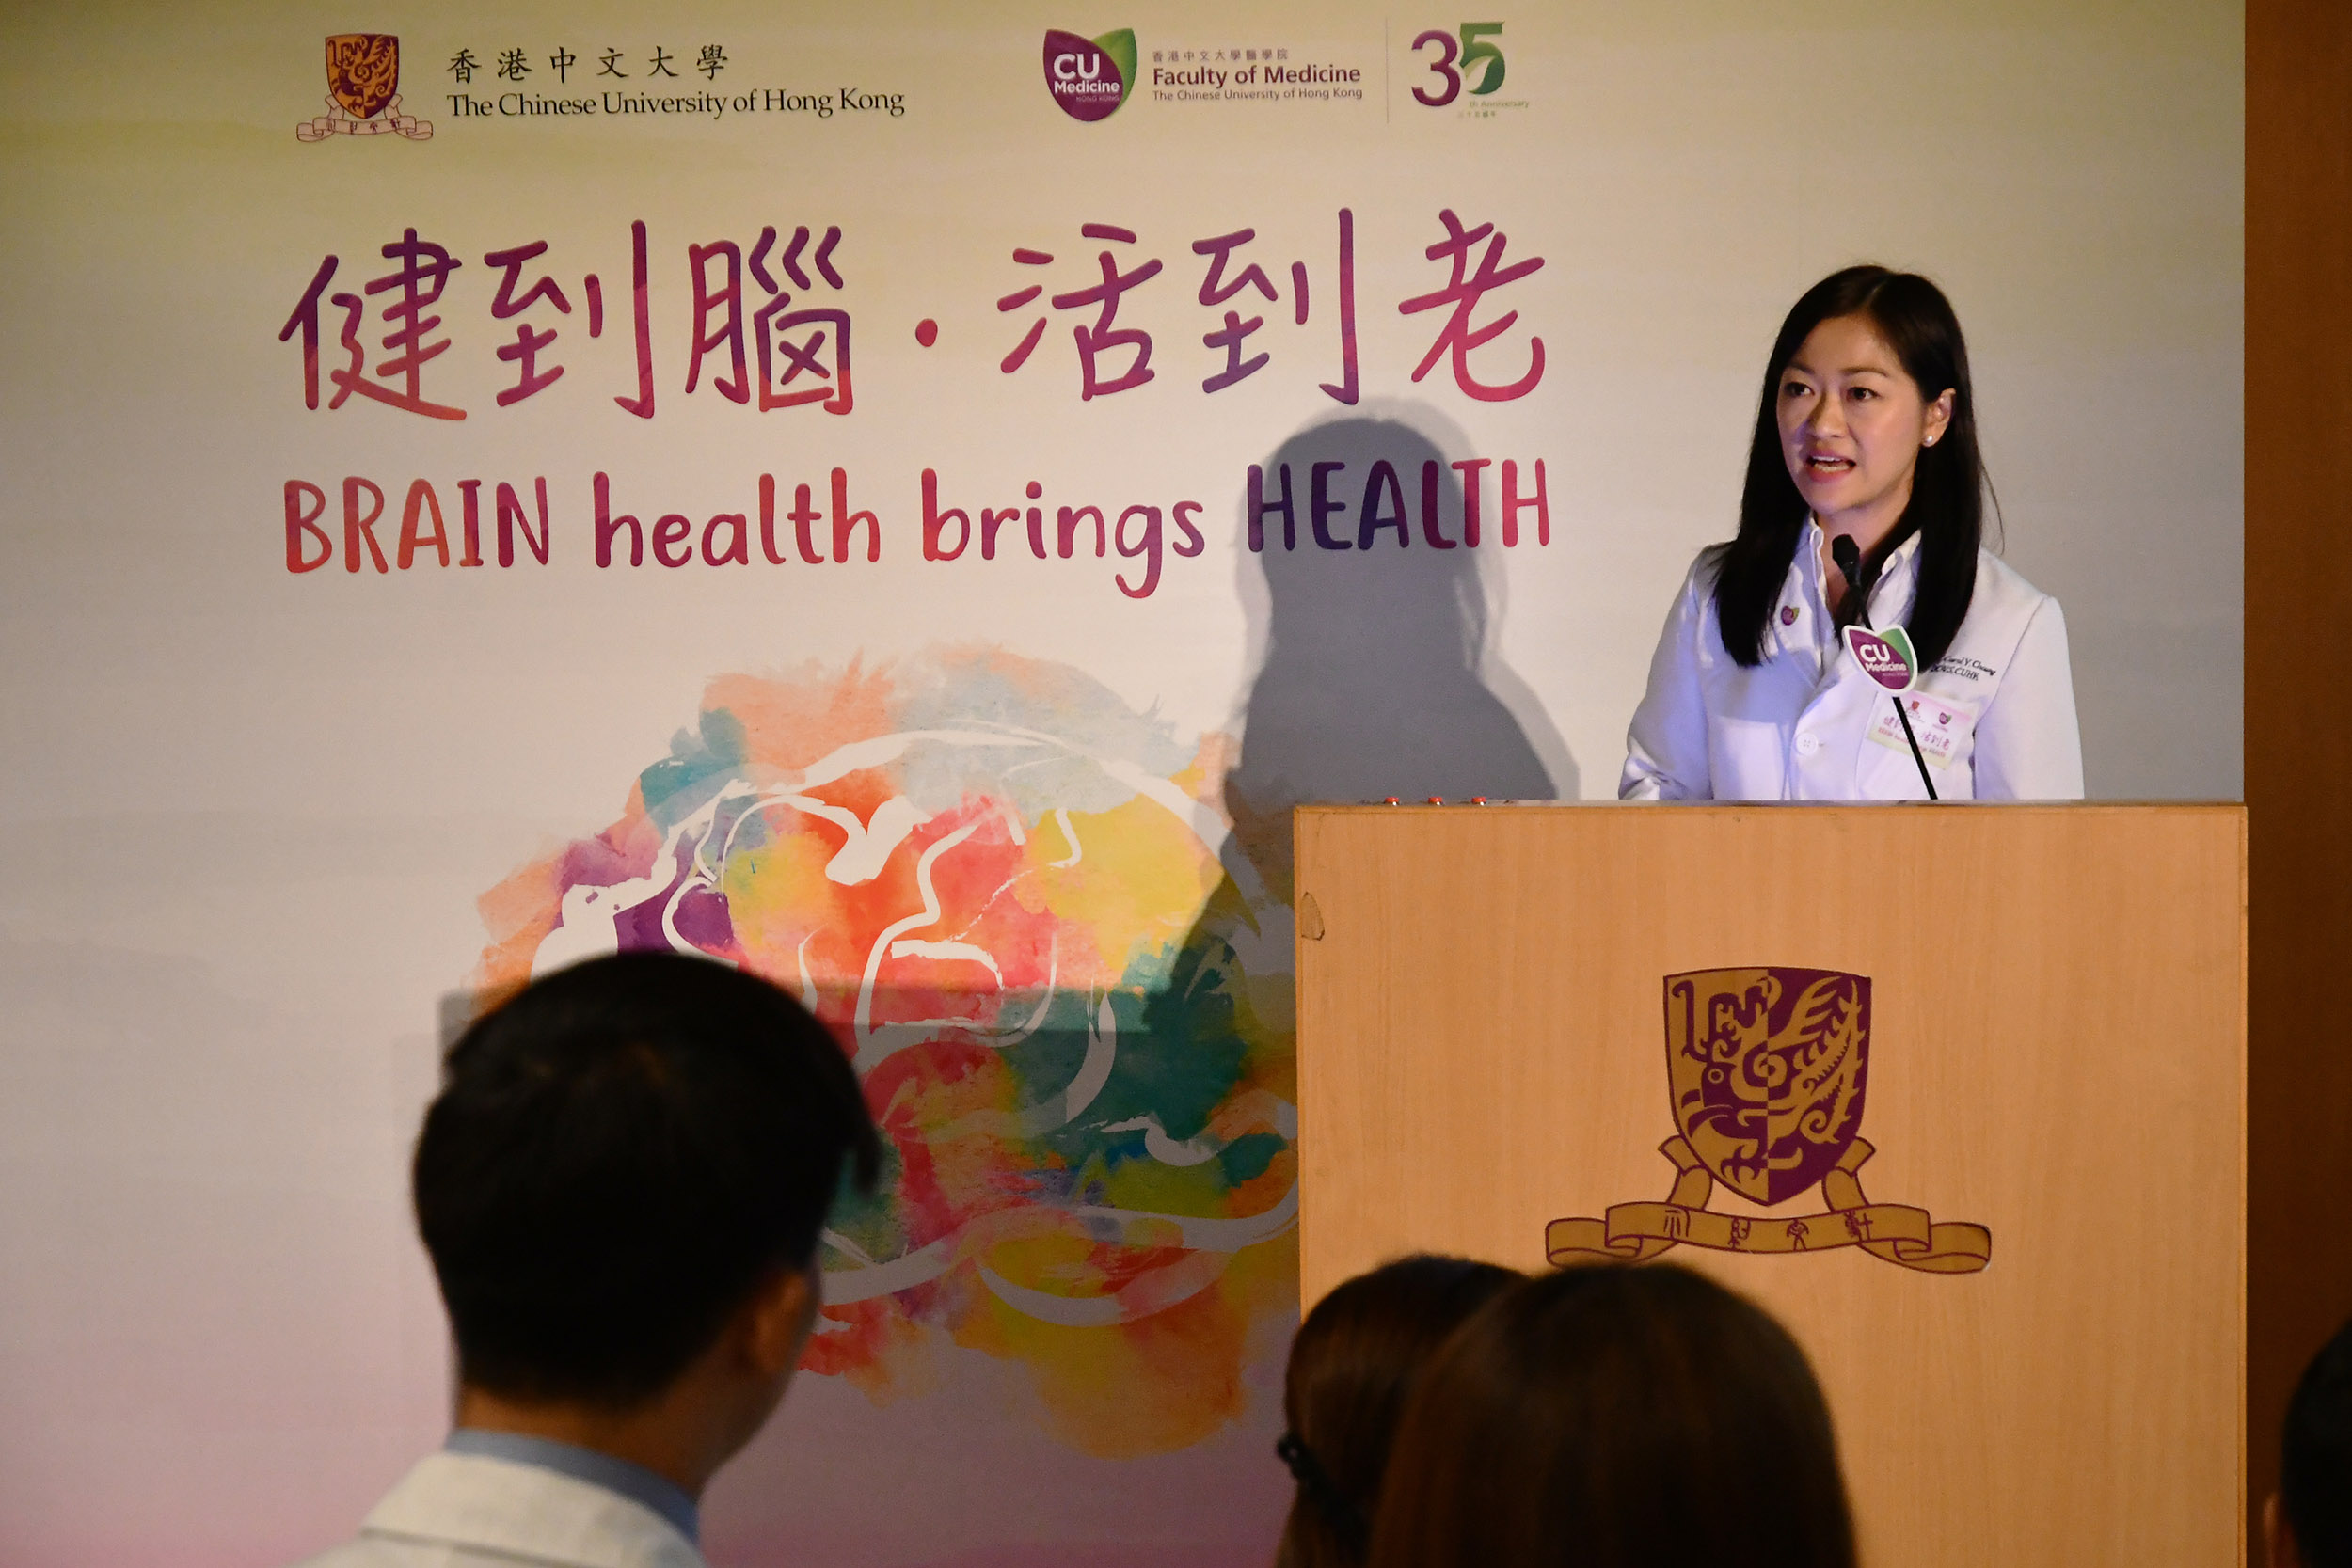 Dr. Carol Yim Lui CHEUNG, Assistant Professor, Department of Ophthalmology & Visual Sciences, CUHK explains how to spot out risk groups of AD from retinal imaging analysis.